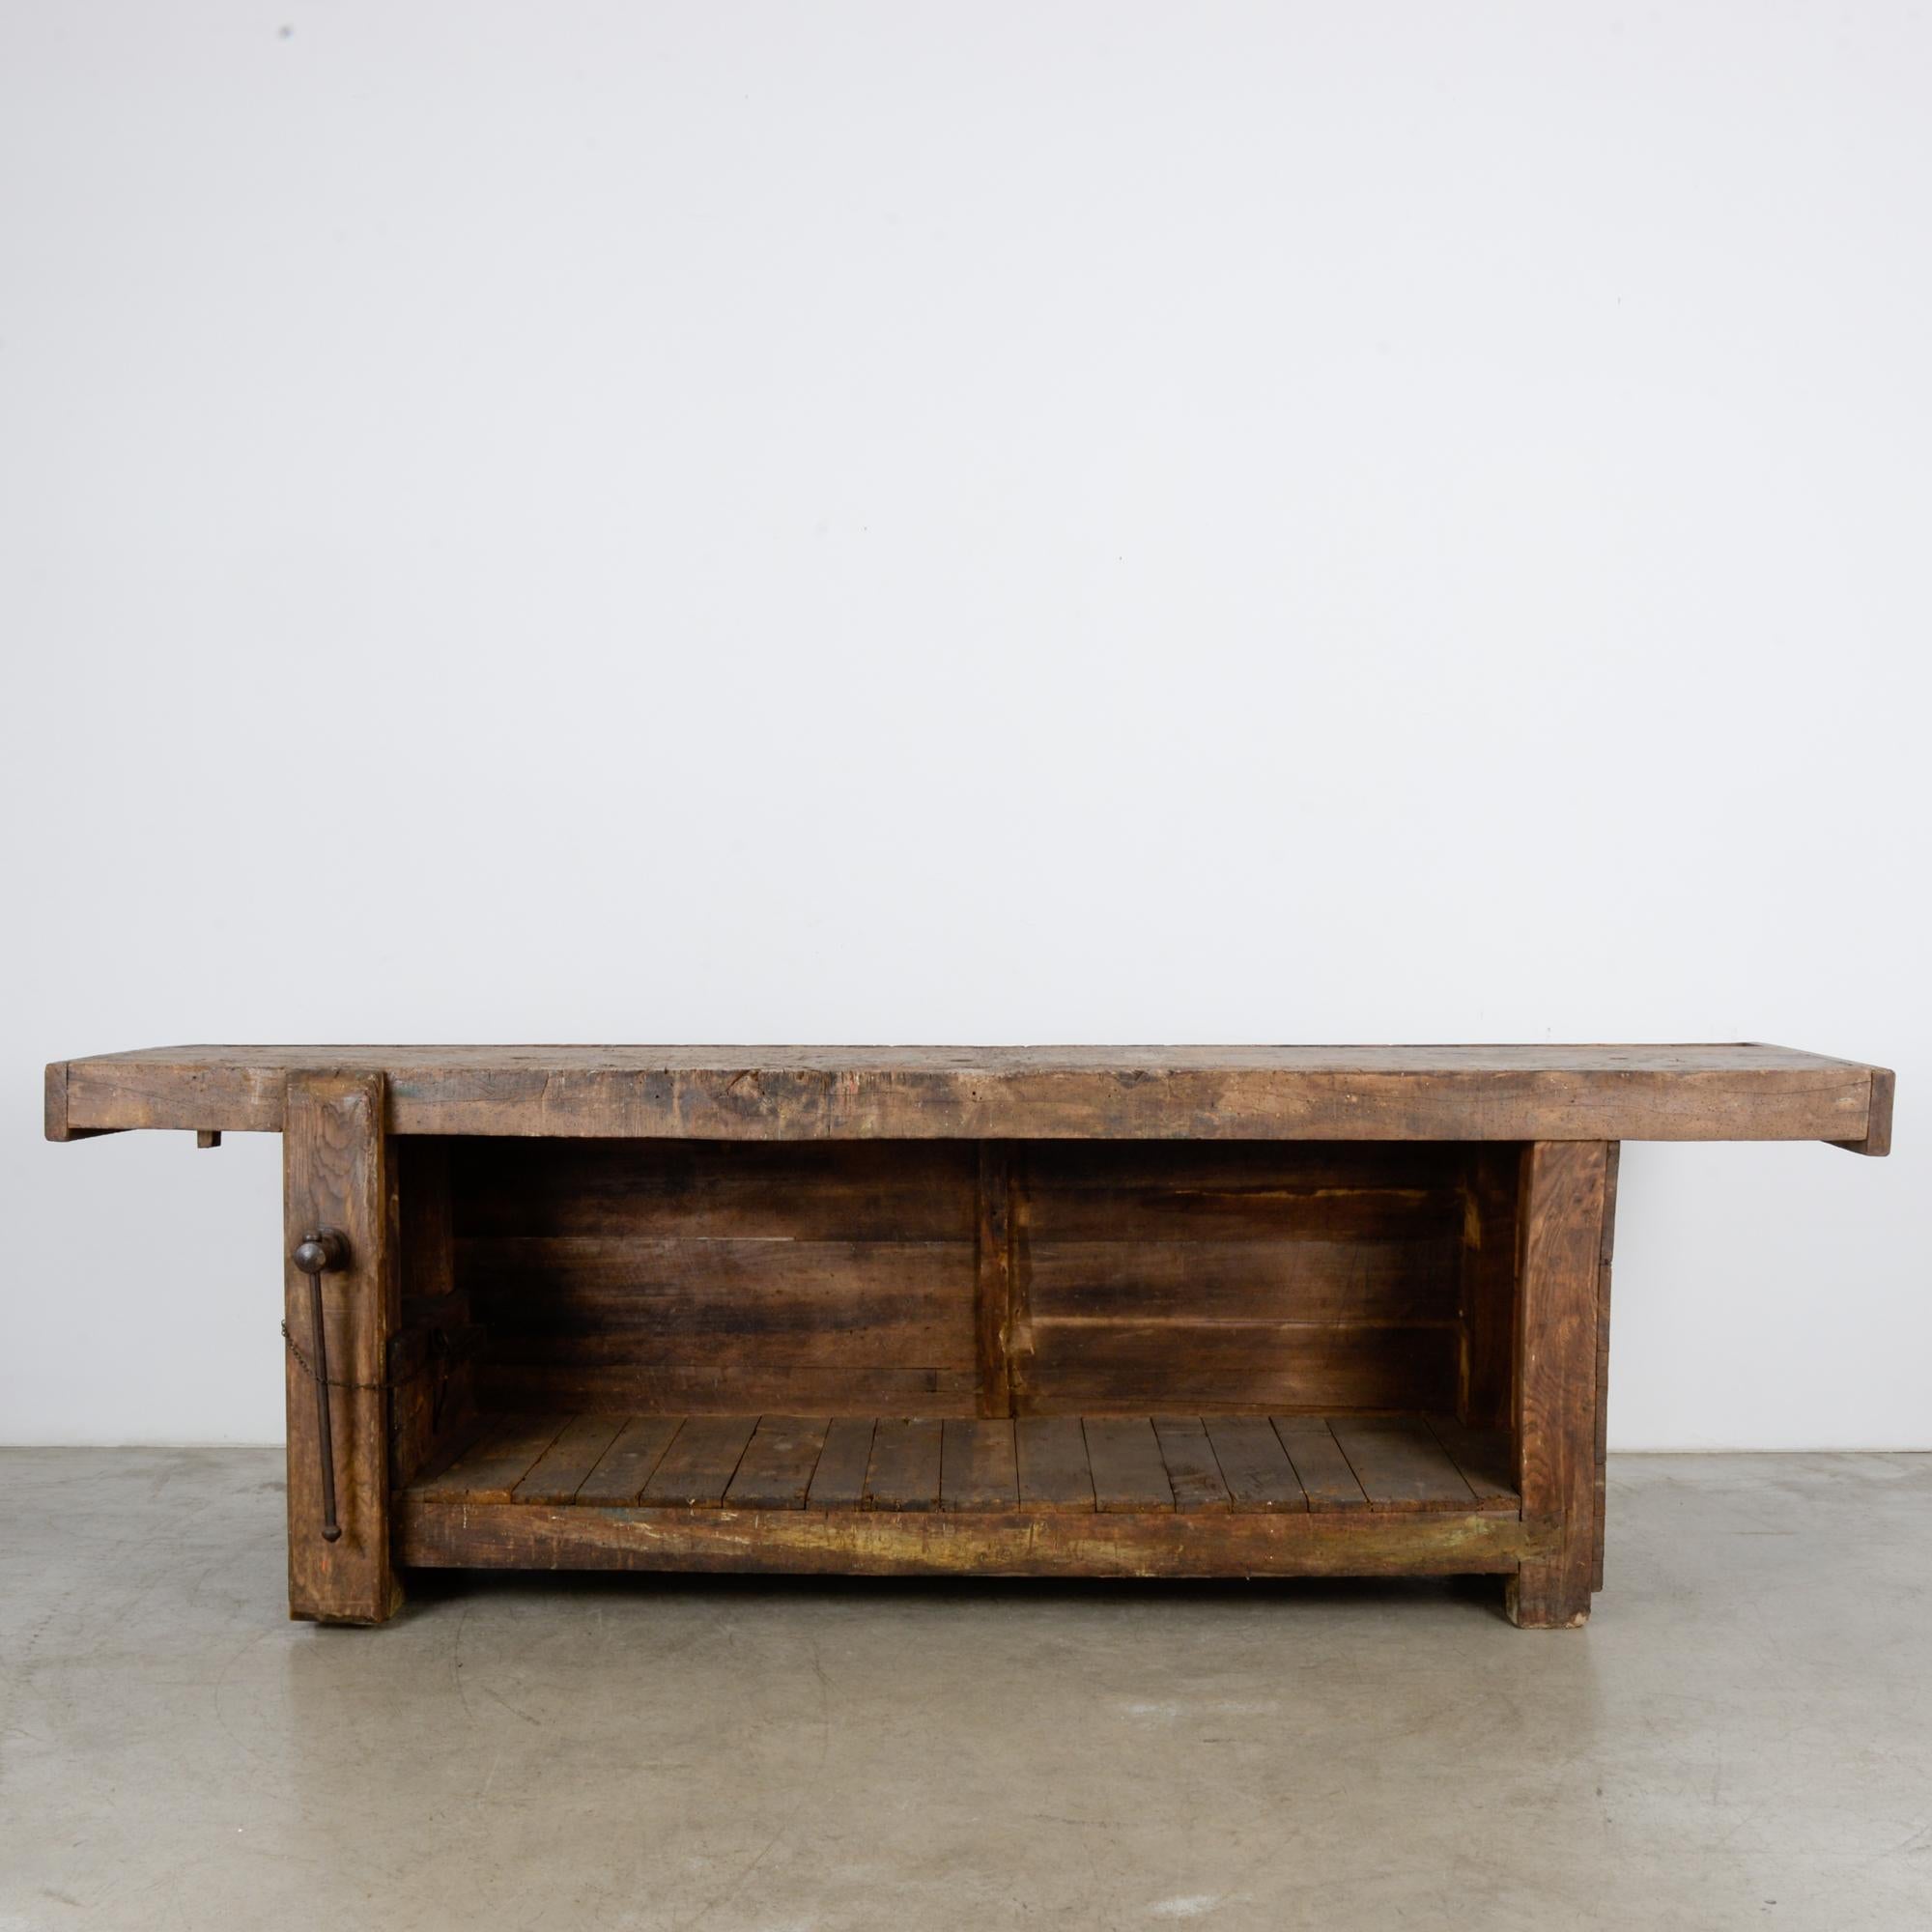 A wooden work table from Belgium, circa 1930. A rugged, dependable construction, composed of a sturdy worktop astride a trapezoid bench, mounted with a vertical wooden vise. A sunken channel runs along the length of the worktop, creating a sanctuary